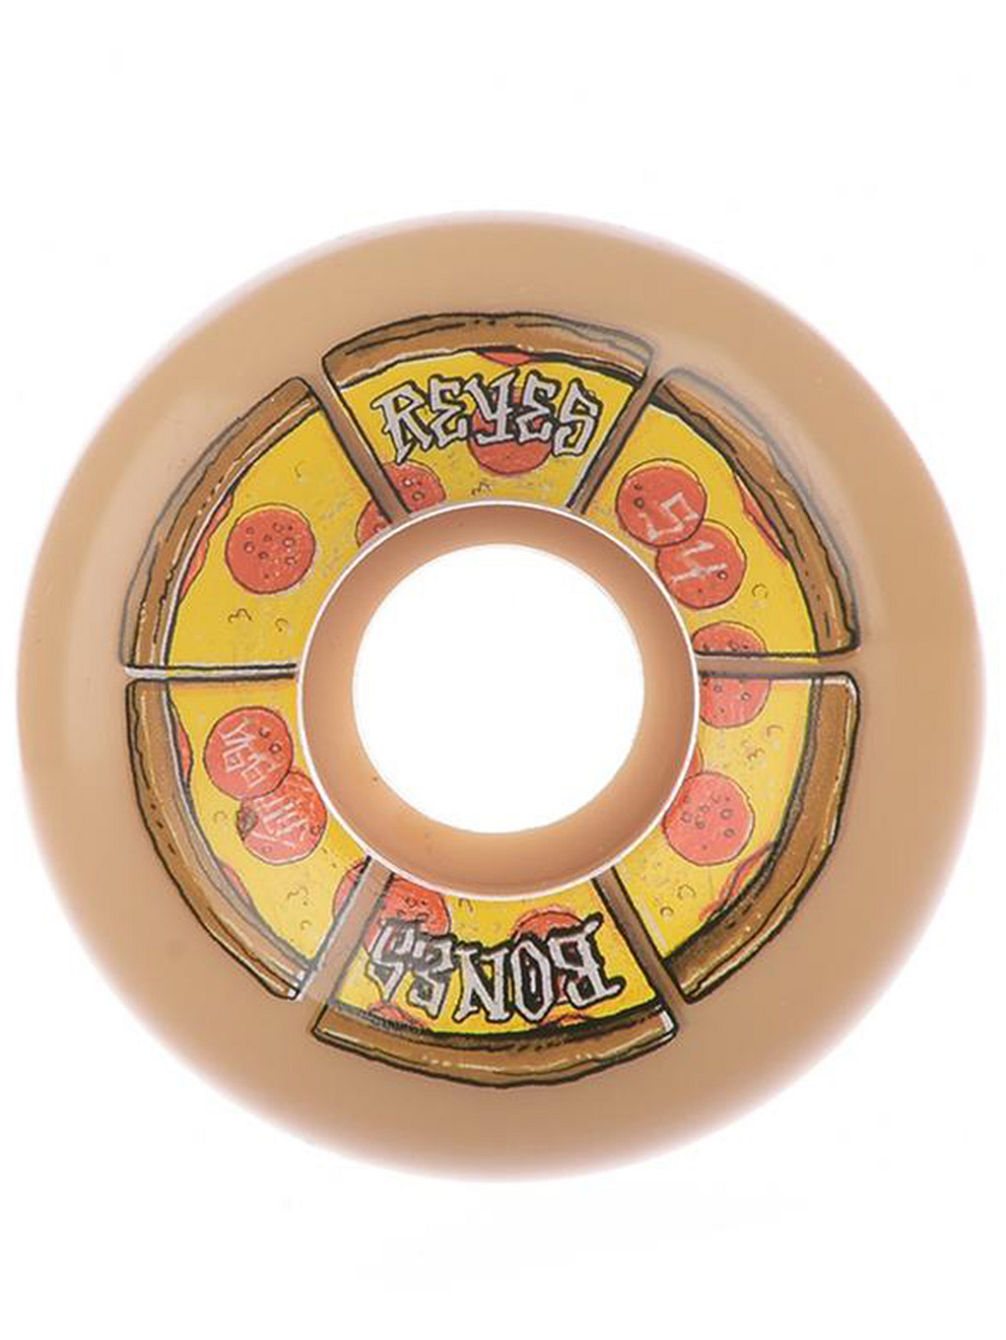 STF Reyes Pipin Hot 99A Wide Cut 54mm Rollen